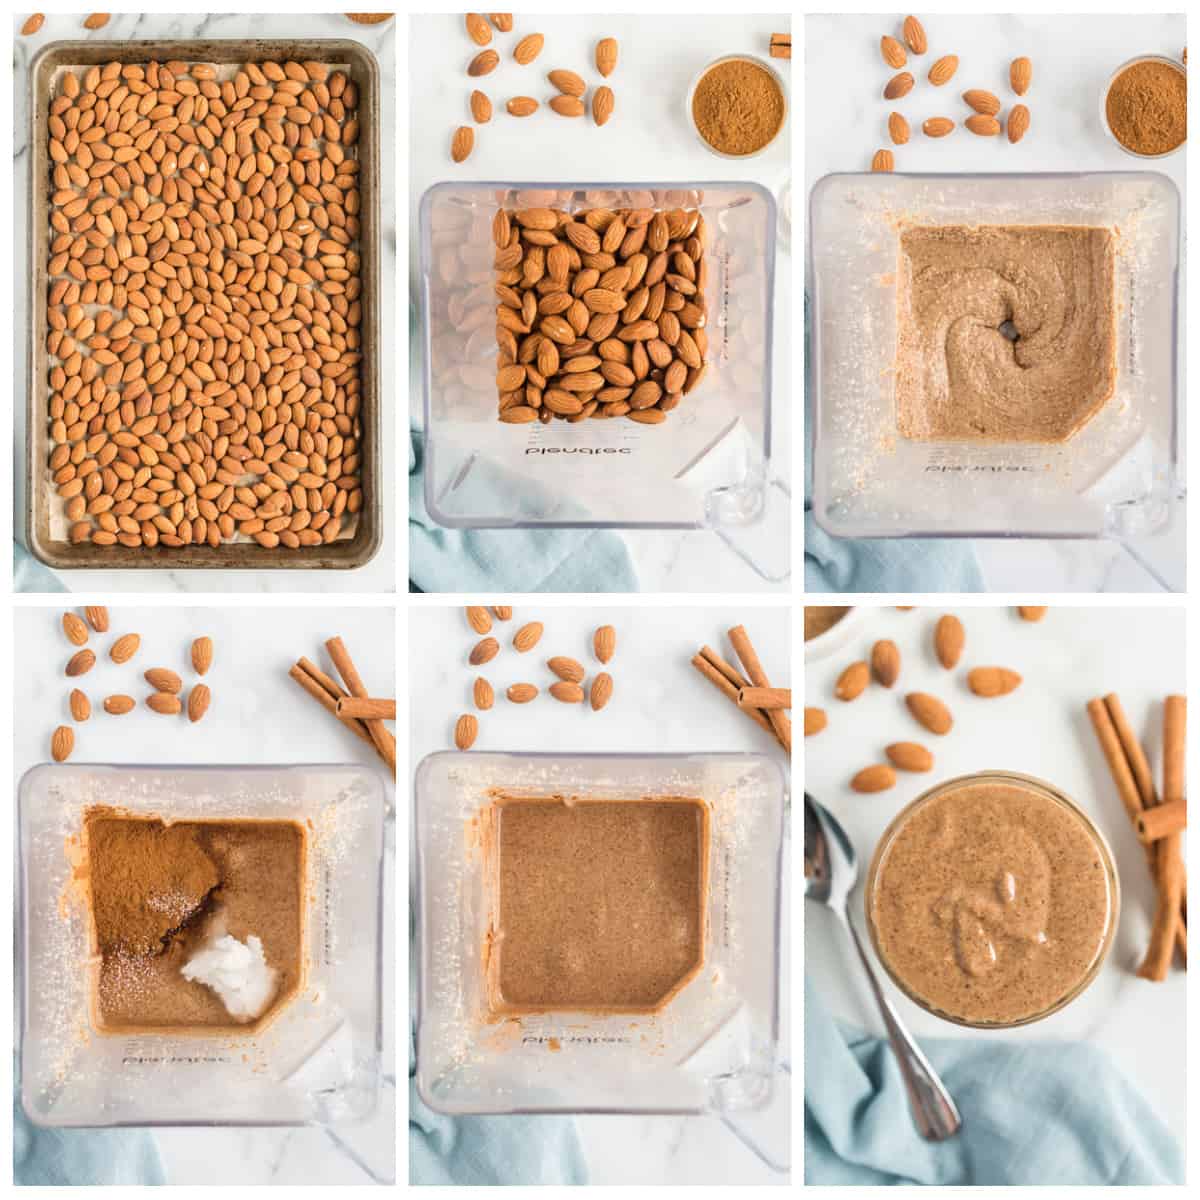 Step by step photos on how to make Almond Butter